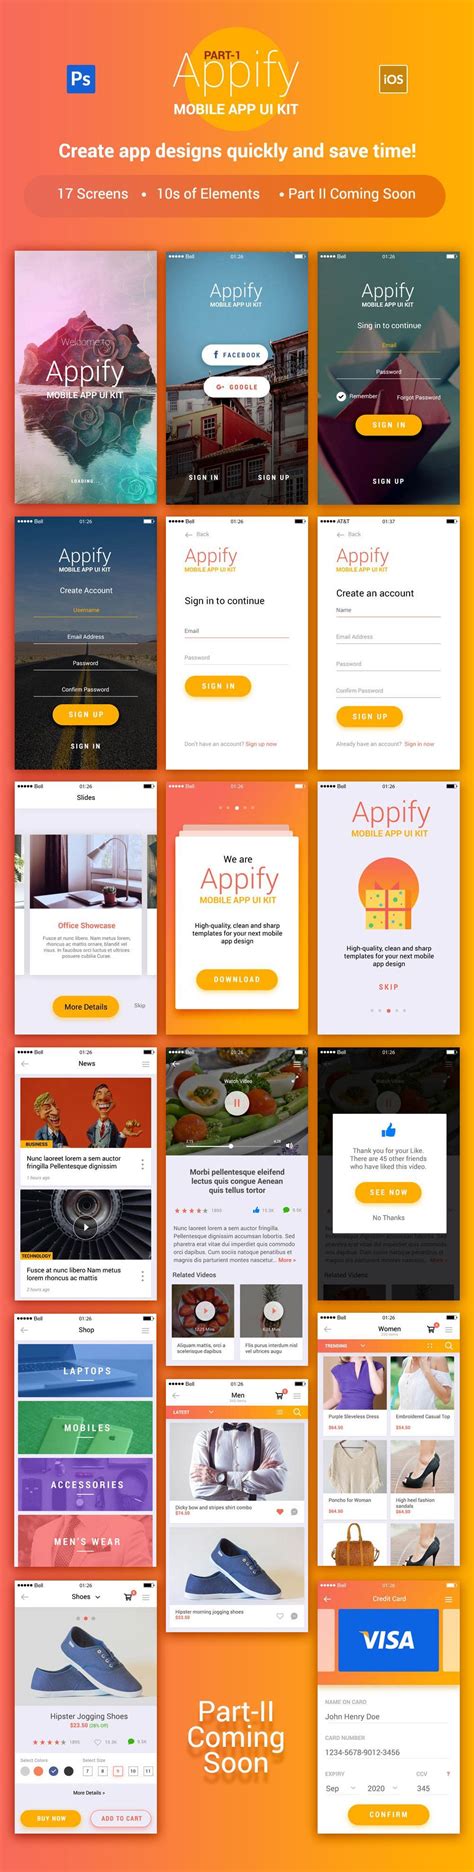 today ill introduce  appify  mobile app ui kit vol     mobile app ui kit